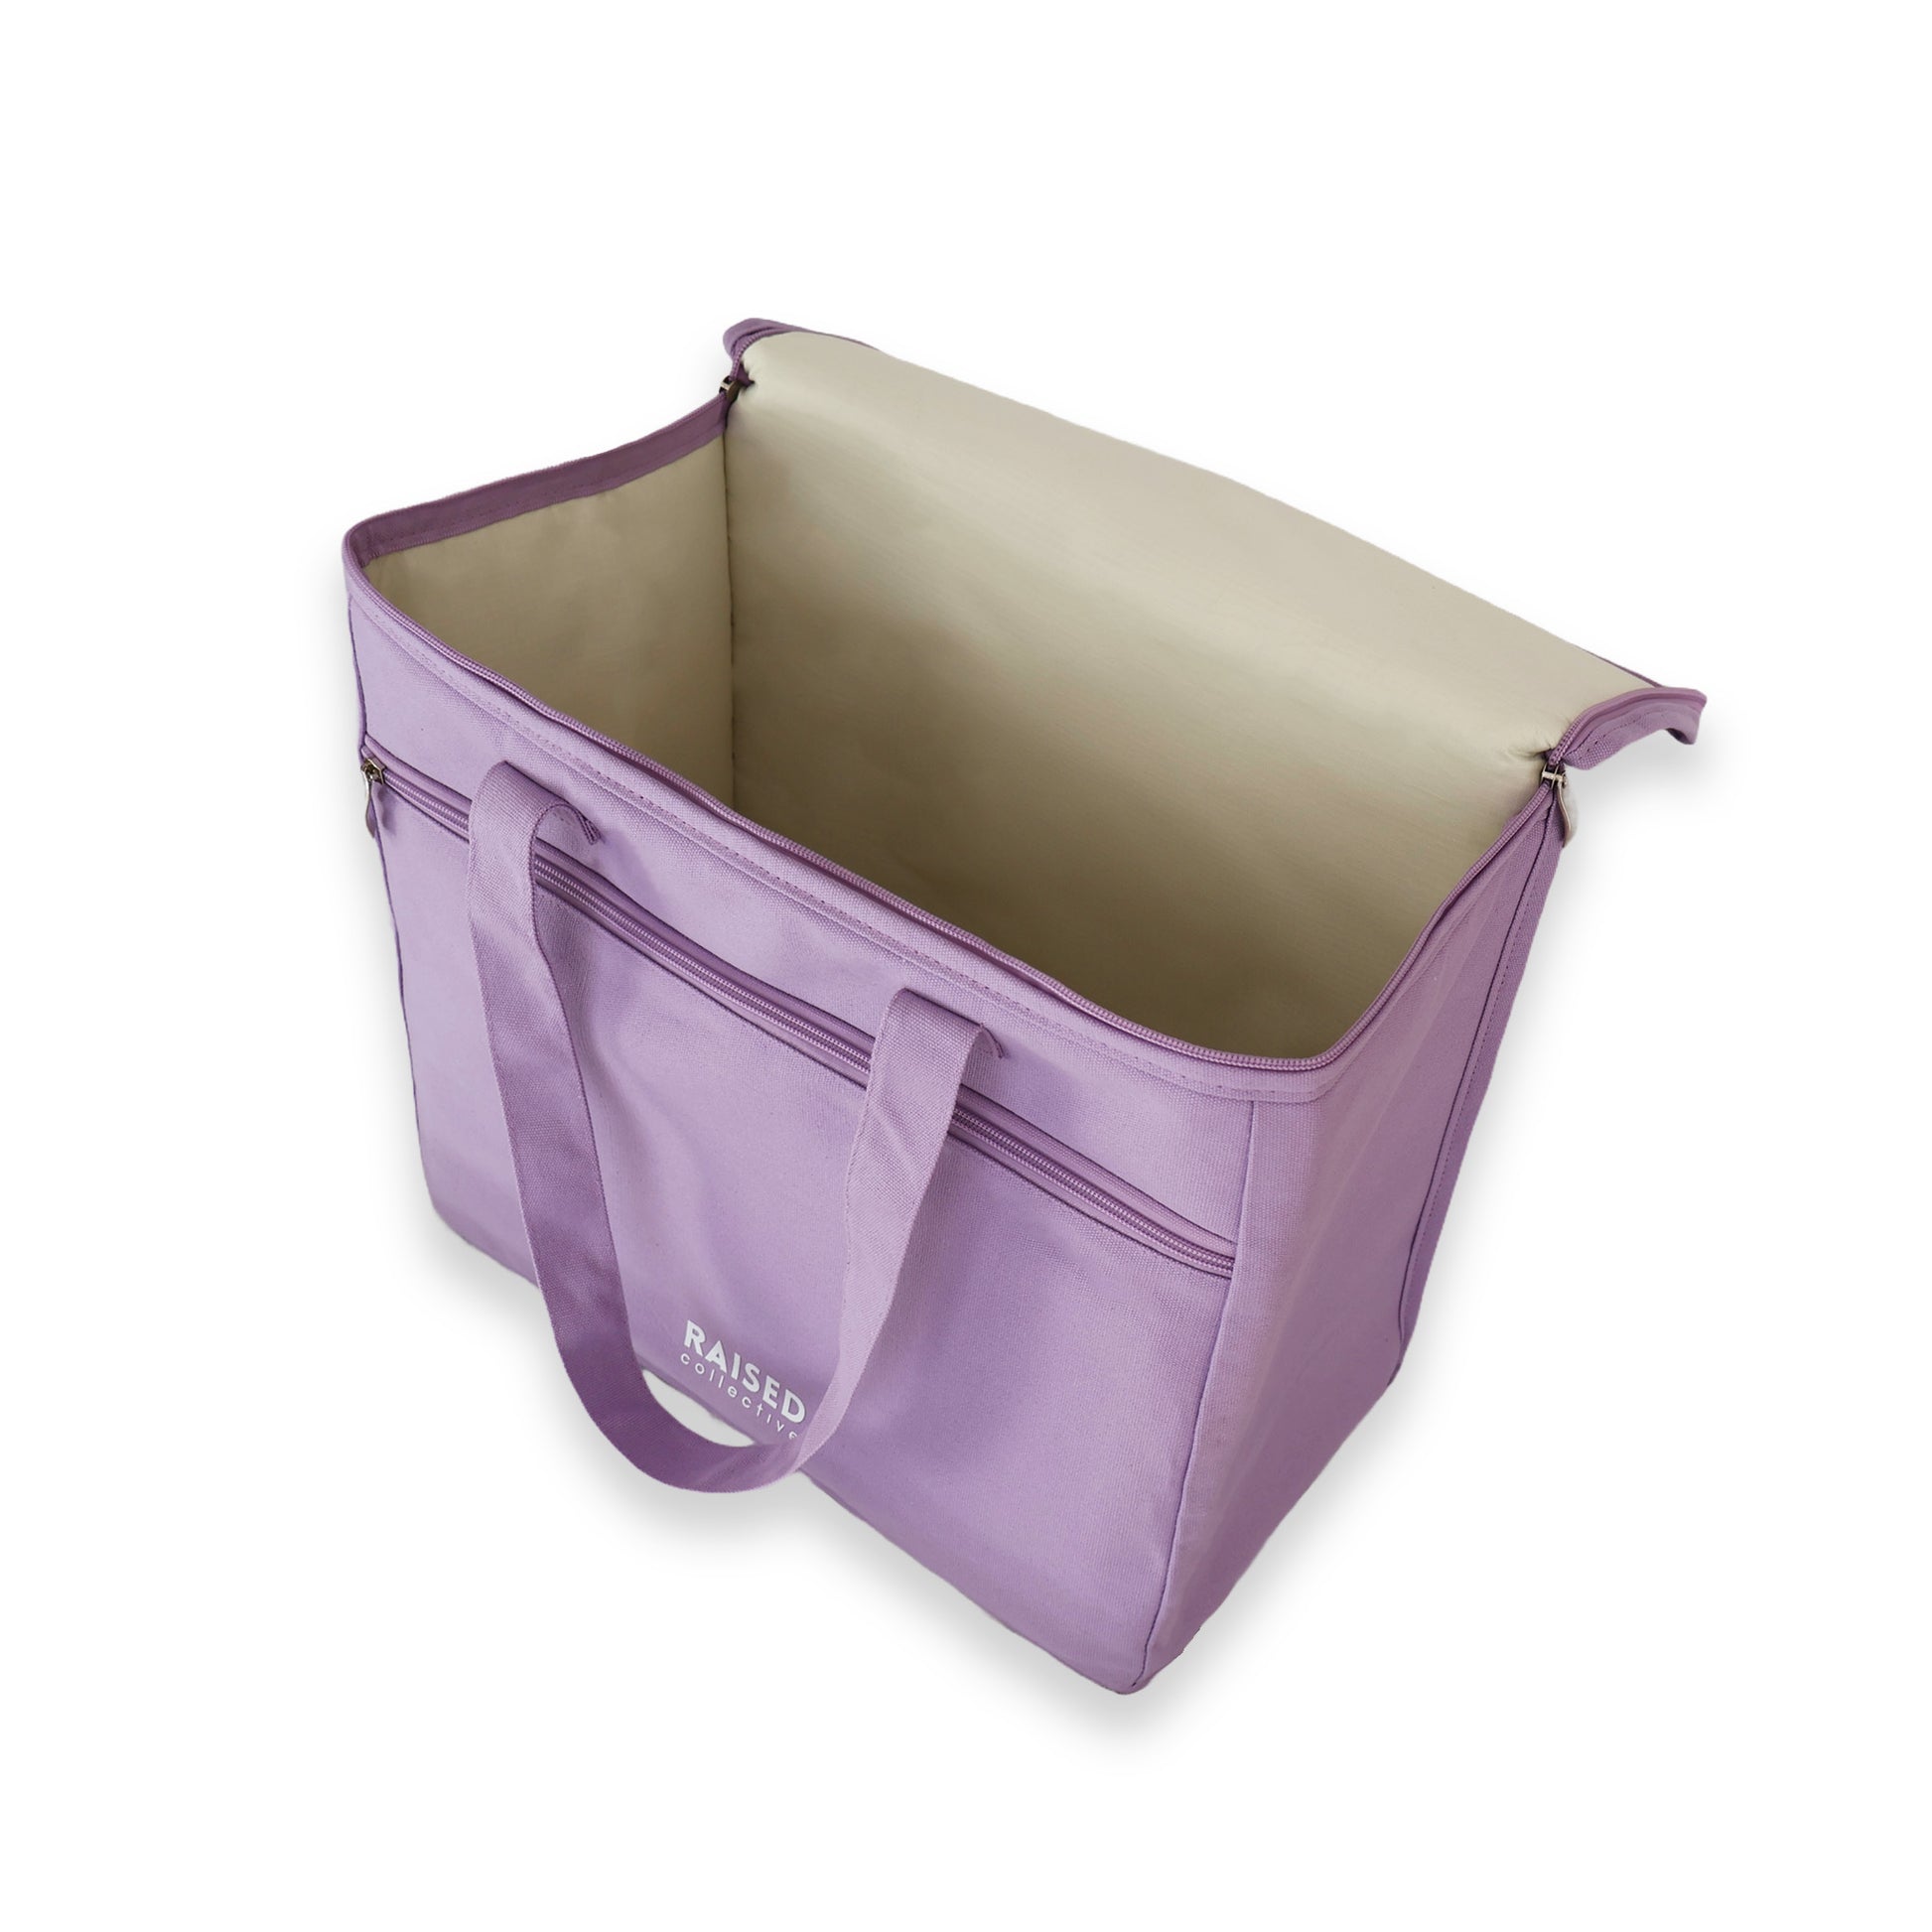 Inner view of the Picnic cooler in lilac, waterproof and insulated lining for keep your cold things cold.